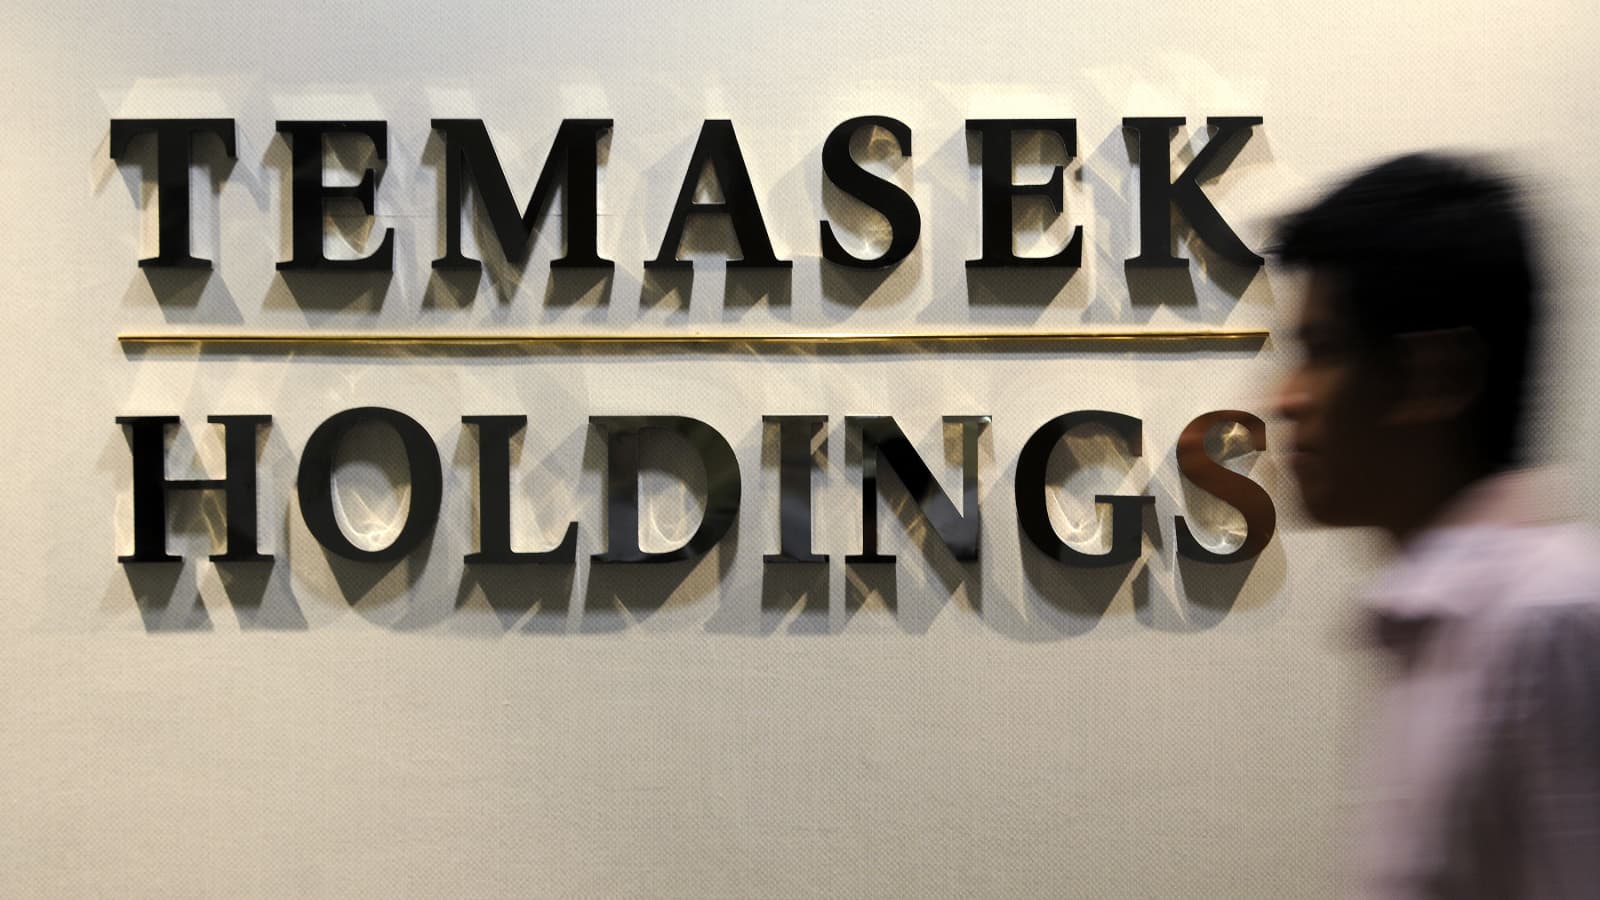 singapore investment company temasek releases annual report 2020